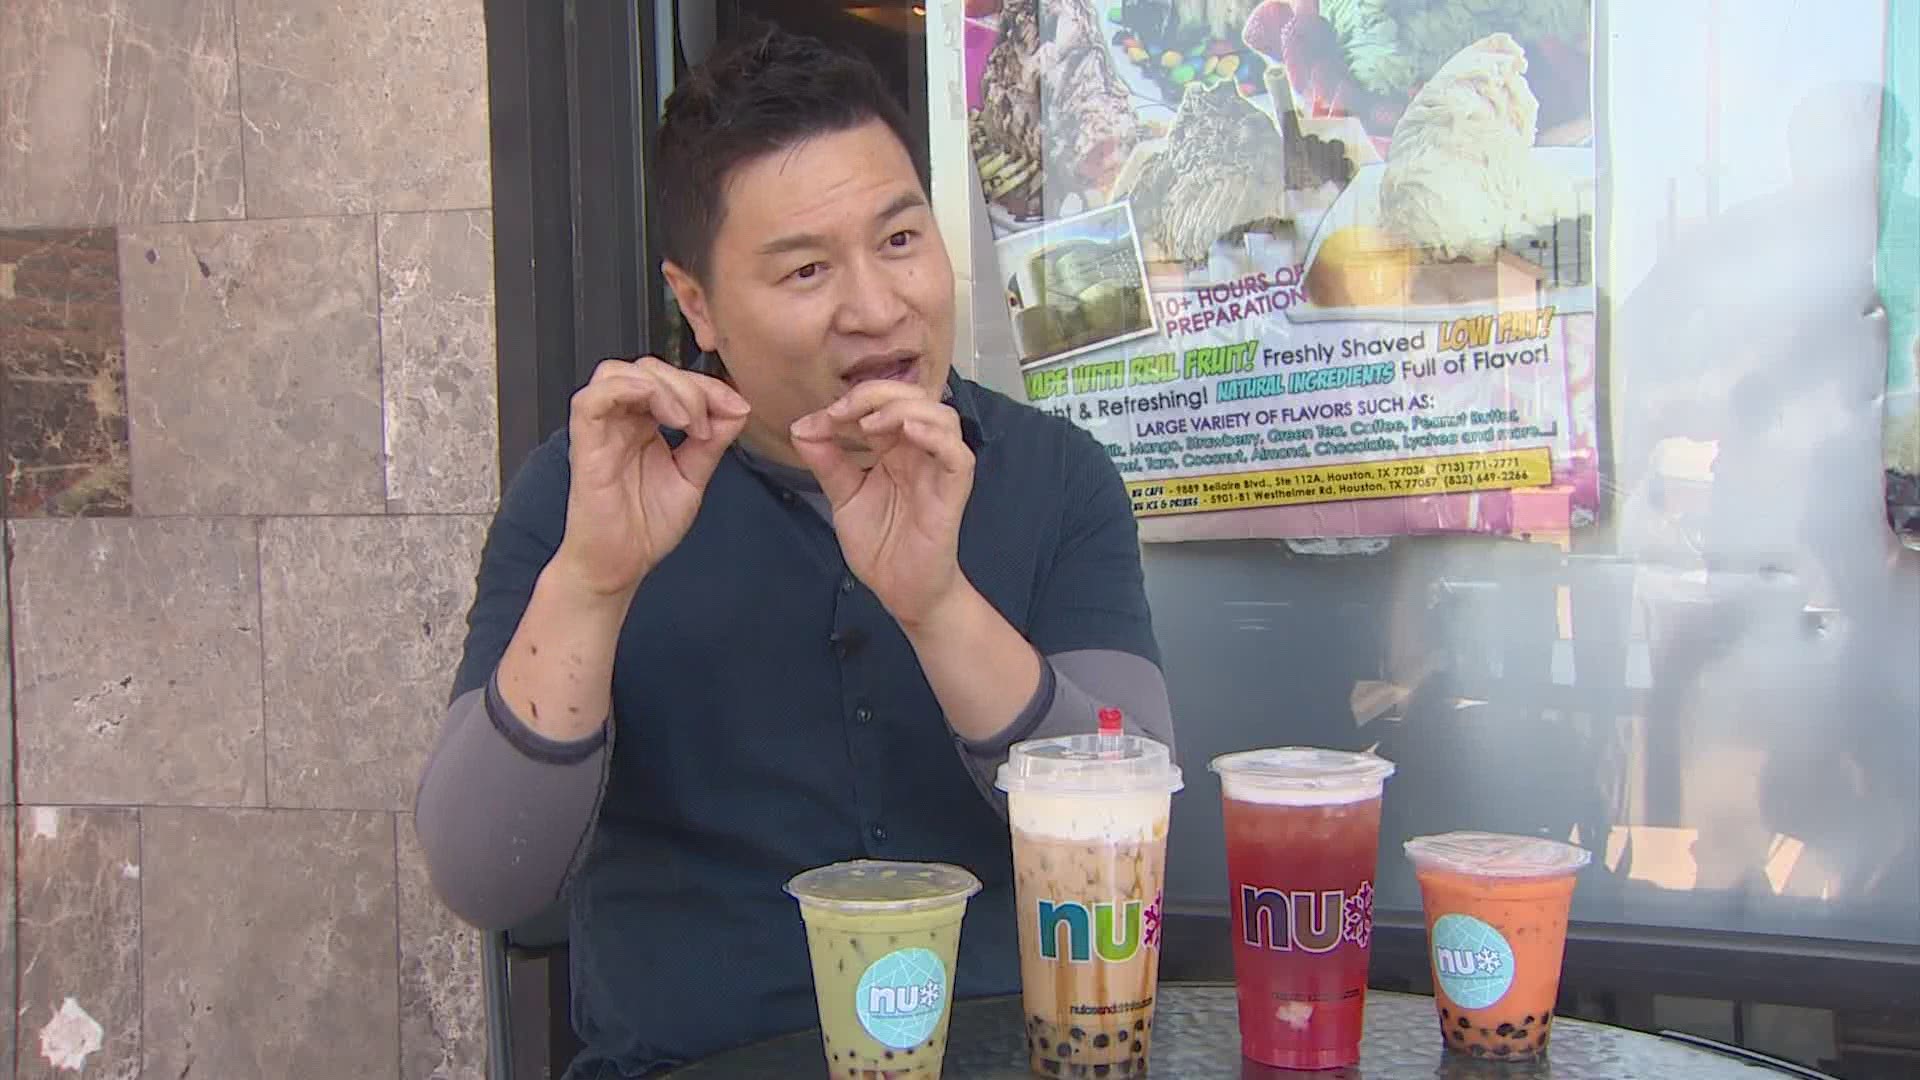 Boba, bubble, pearls or tapioca teas -- whatever your call it, that chewy, gooey goodness has launched a now $2 billion drink trade.